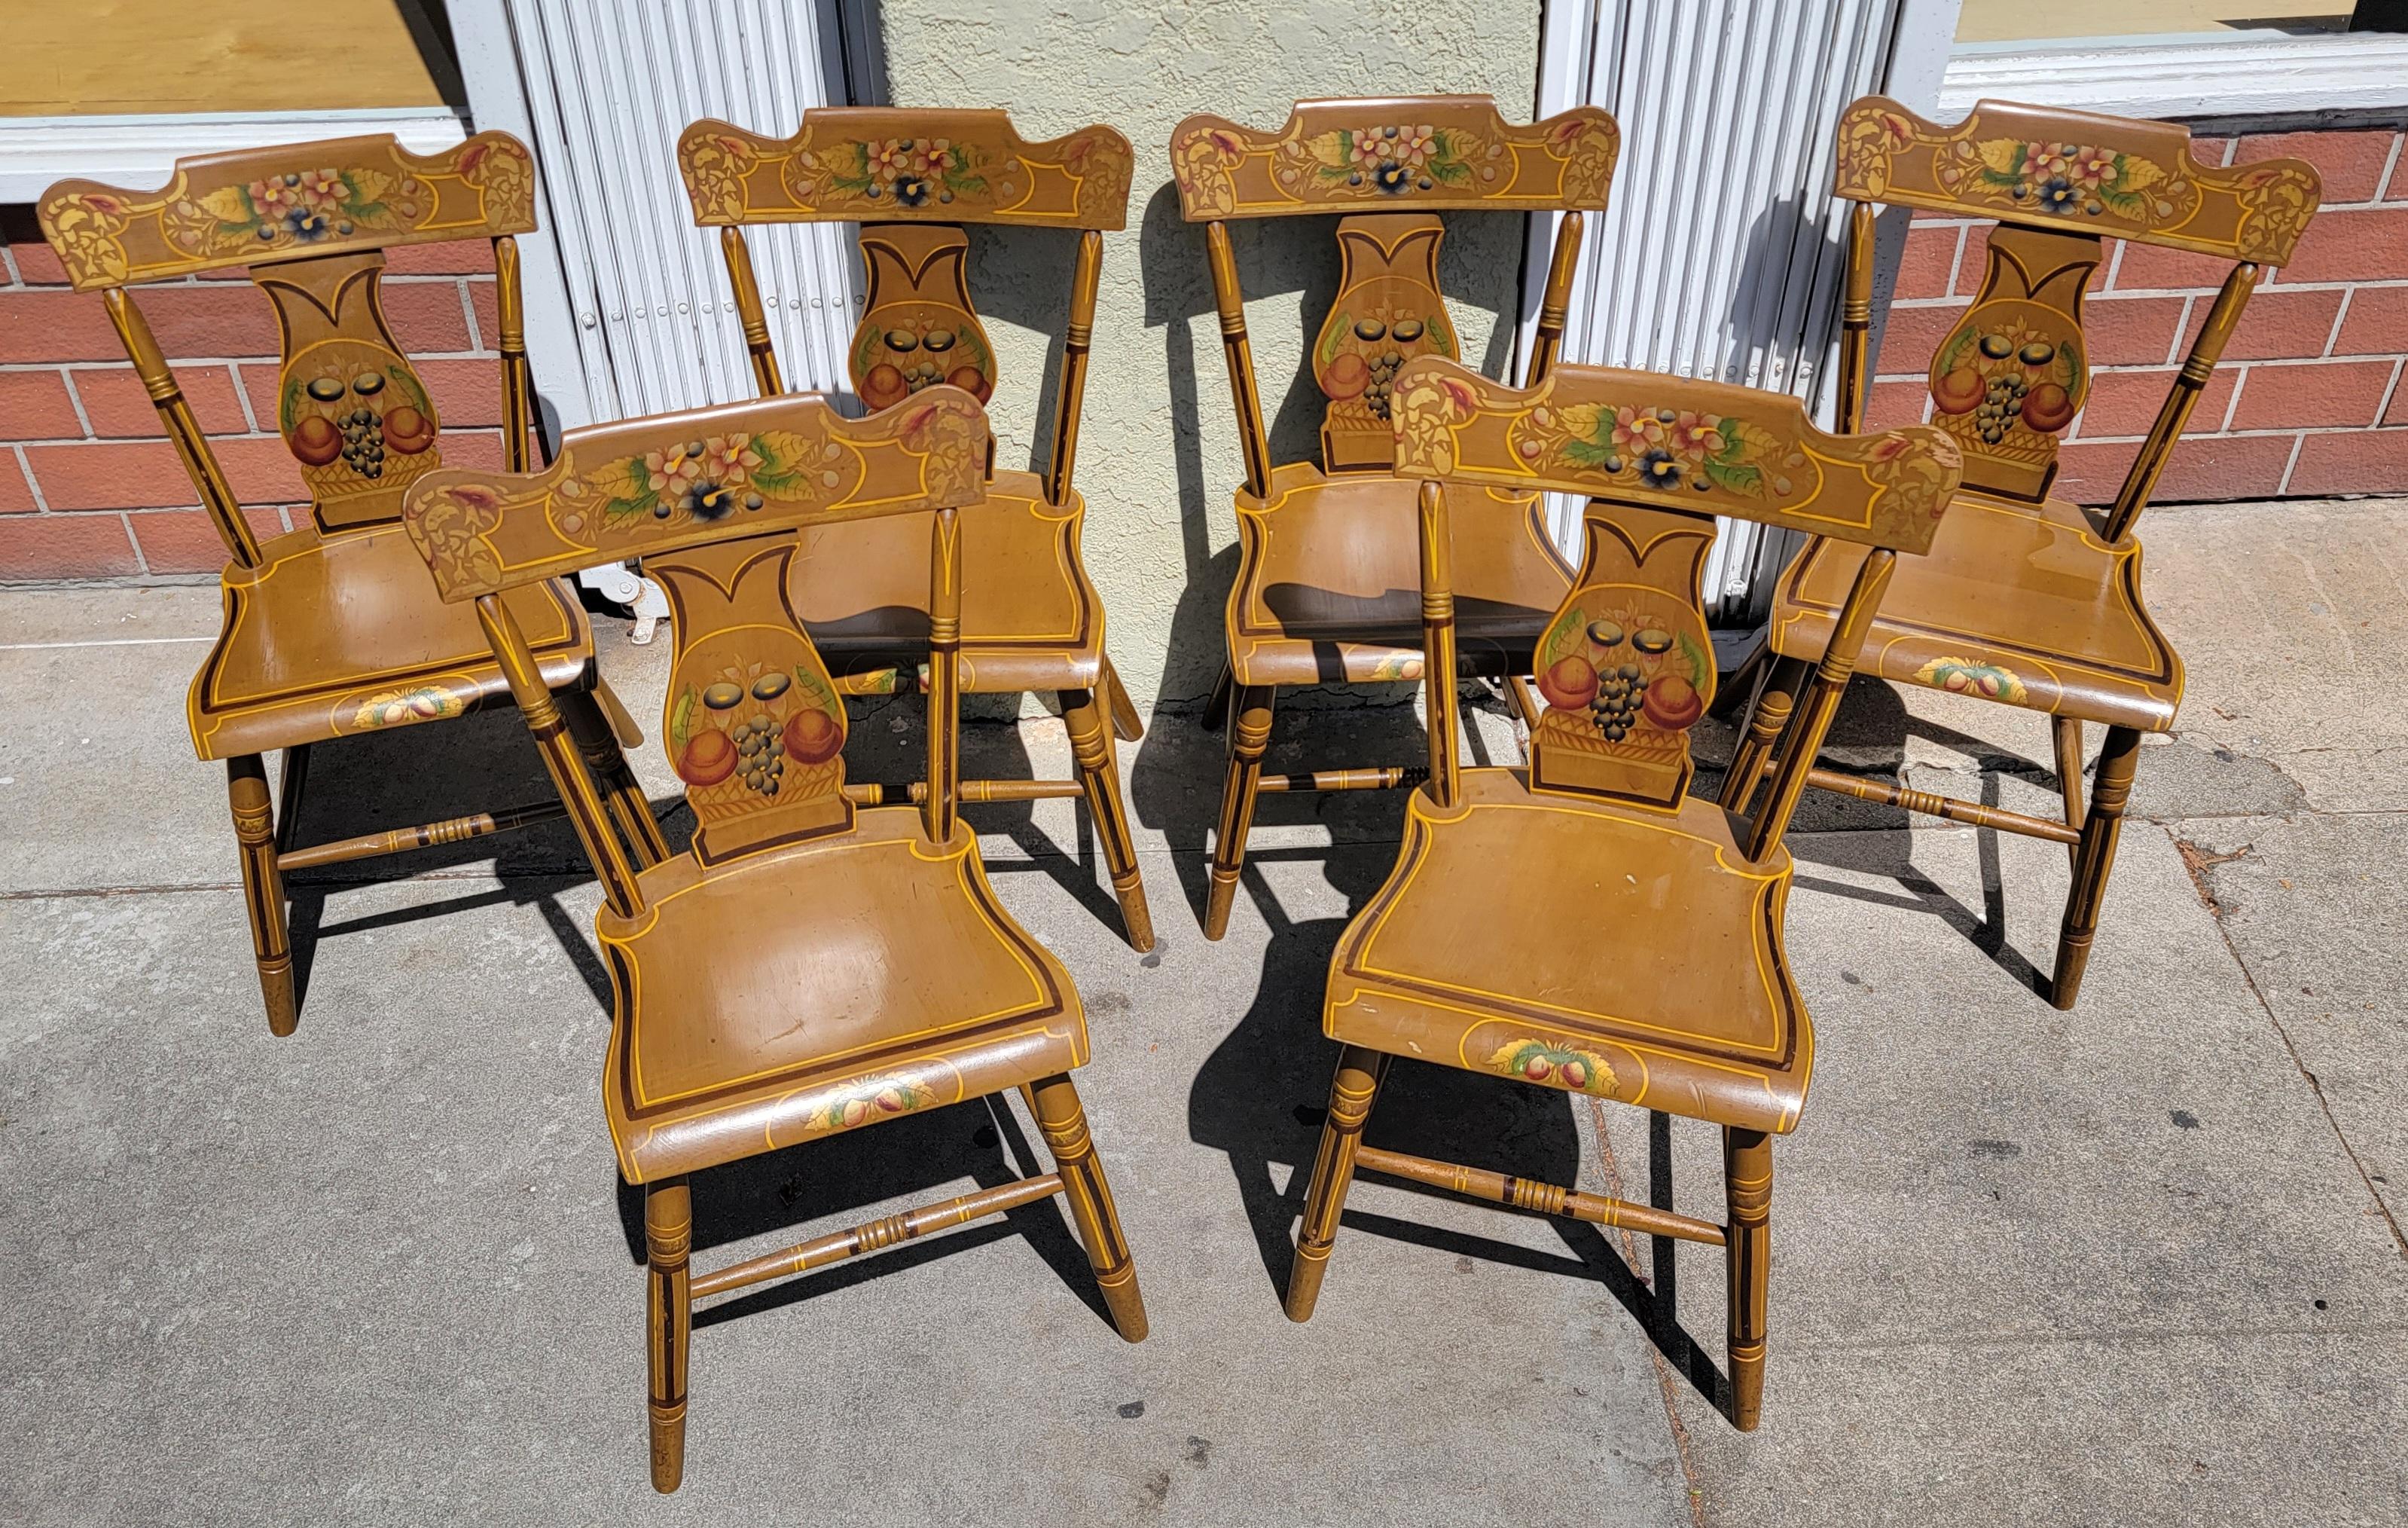 hand painted chairs in lititz pa